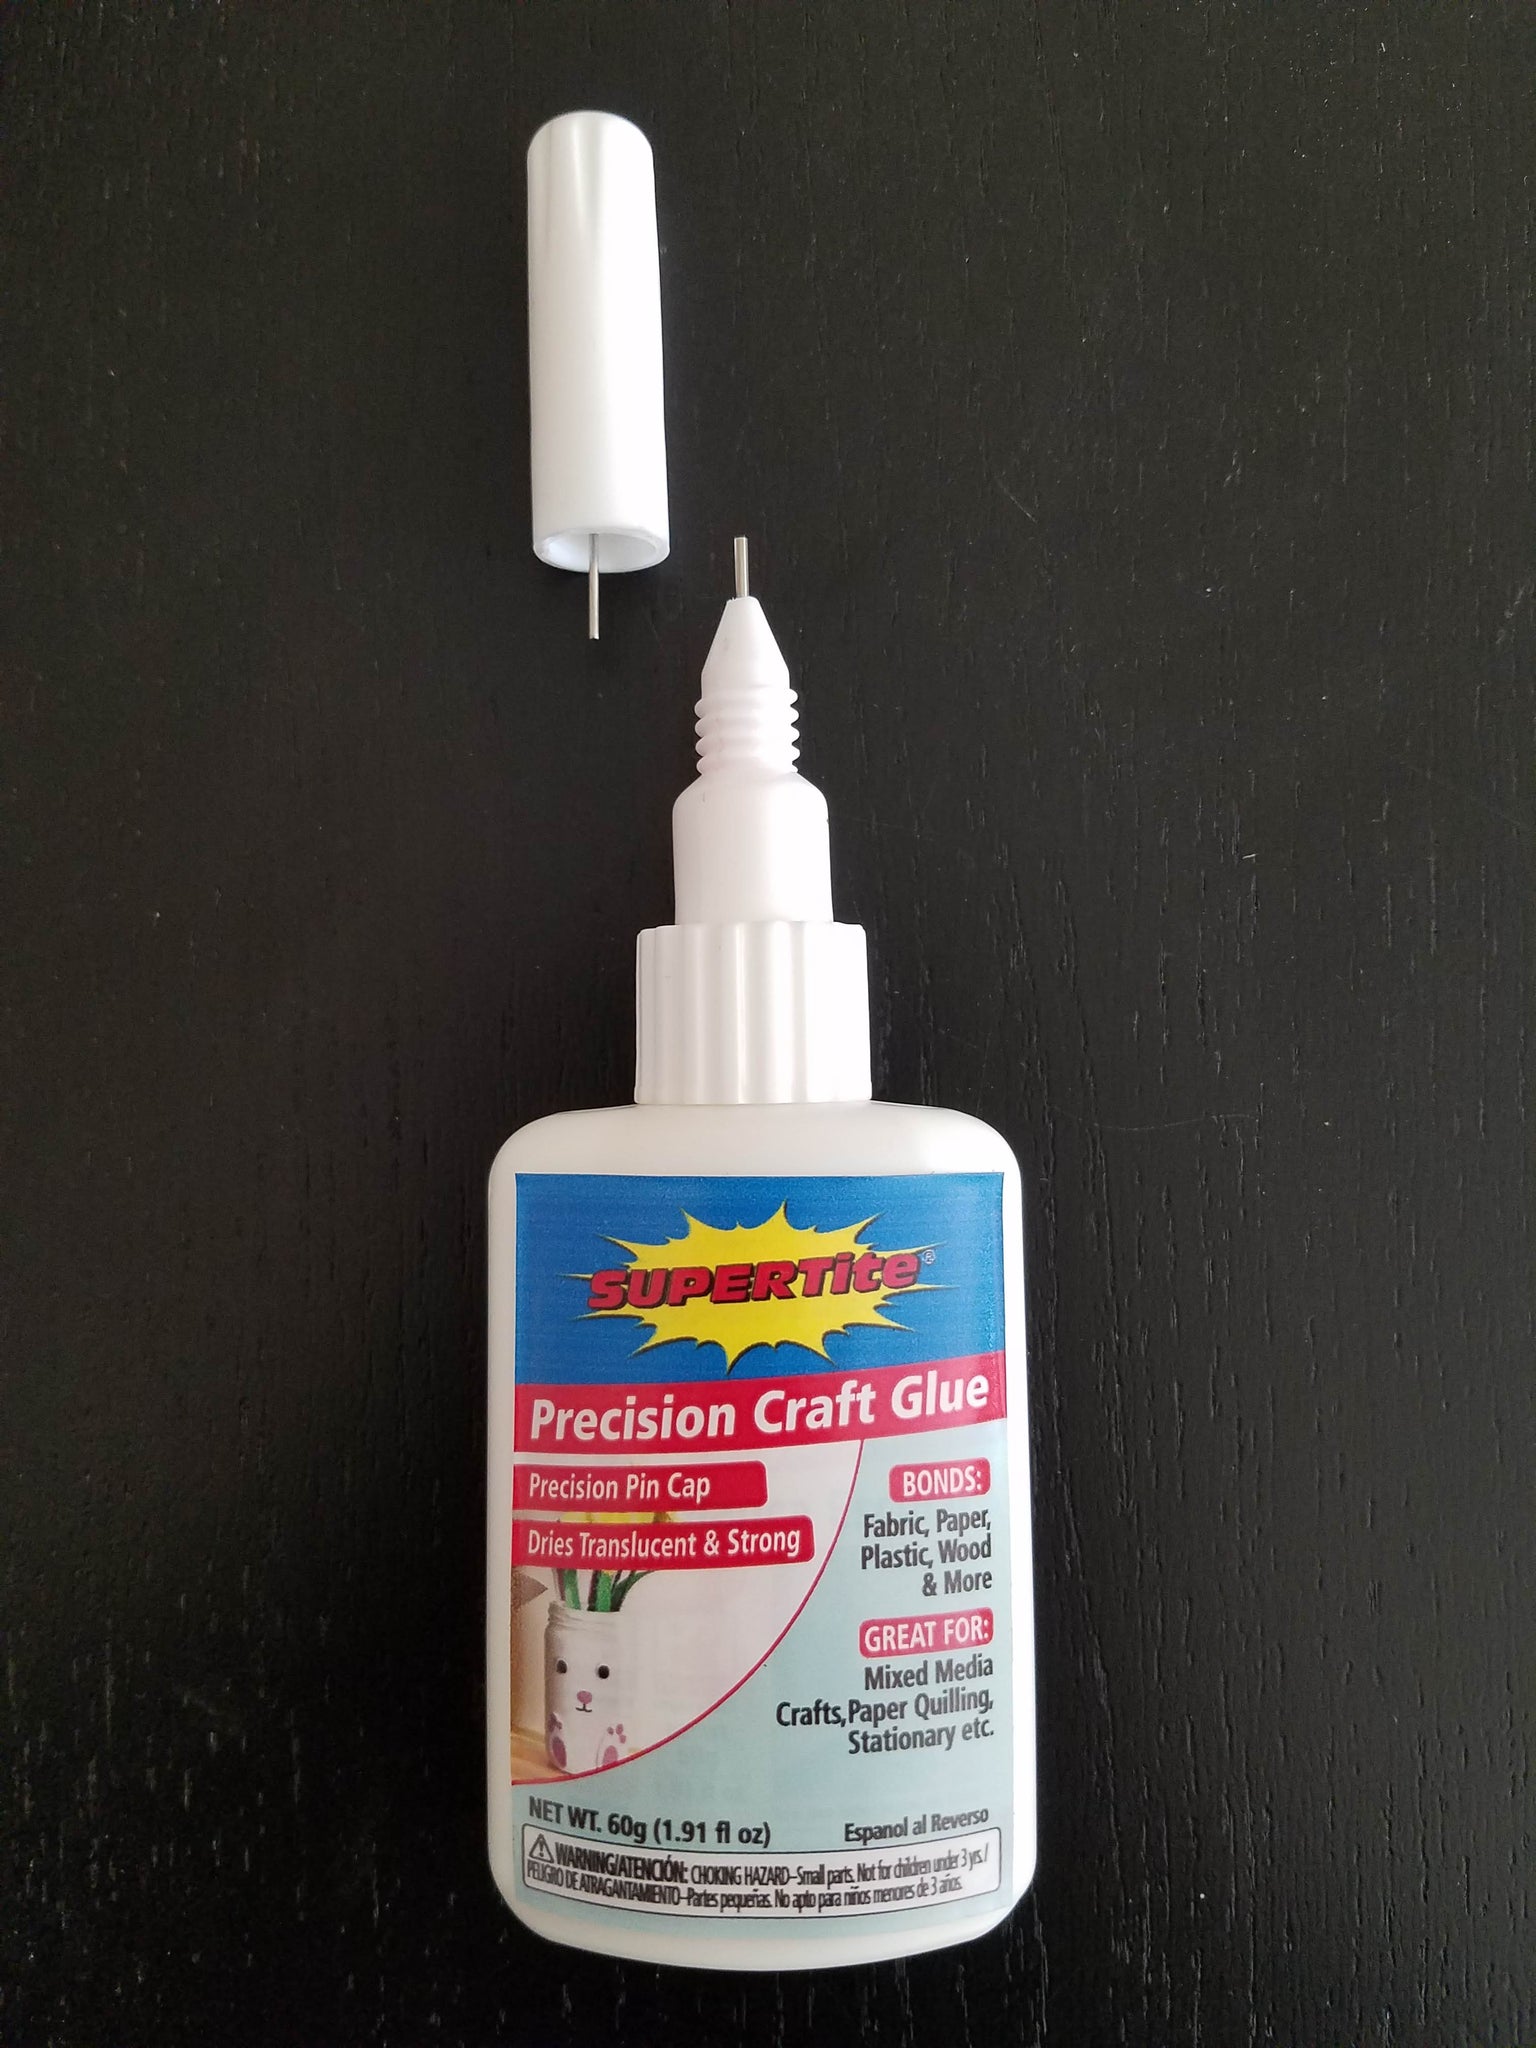 Craft Glue 2oz & Precision Tips, Craft Glue Bottles with Fine Tip, Craft Glue Quick Dry Clear, Strong Tacky Glue, Fabric Glue Permanent for Paper